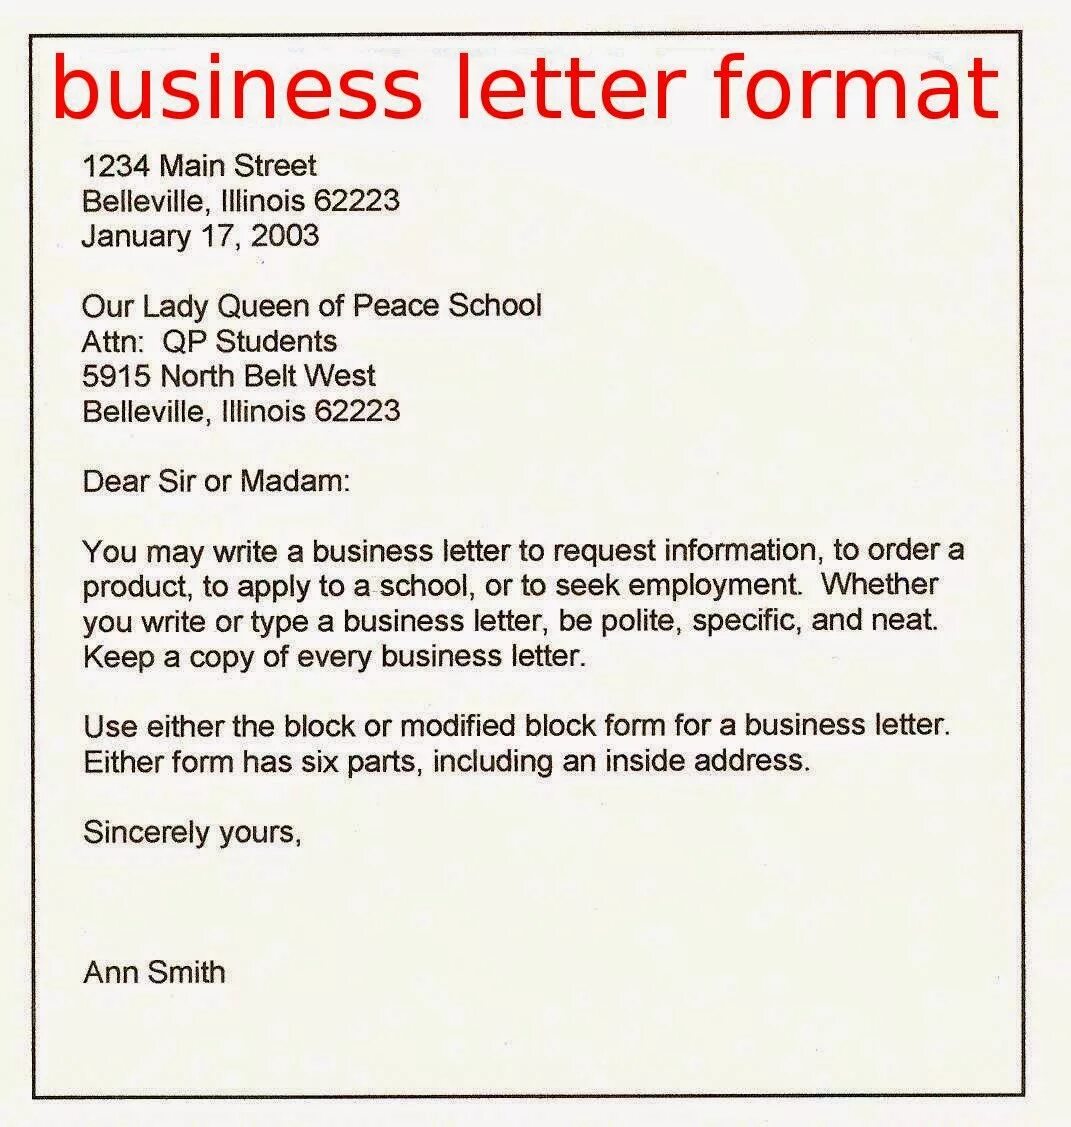 Letters пример. Business Letter. Business Letter format. Business Letter example. Formal Business Letter.